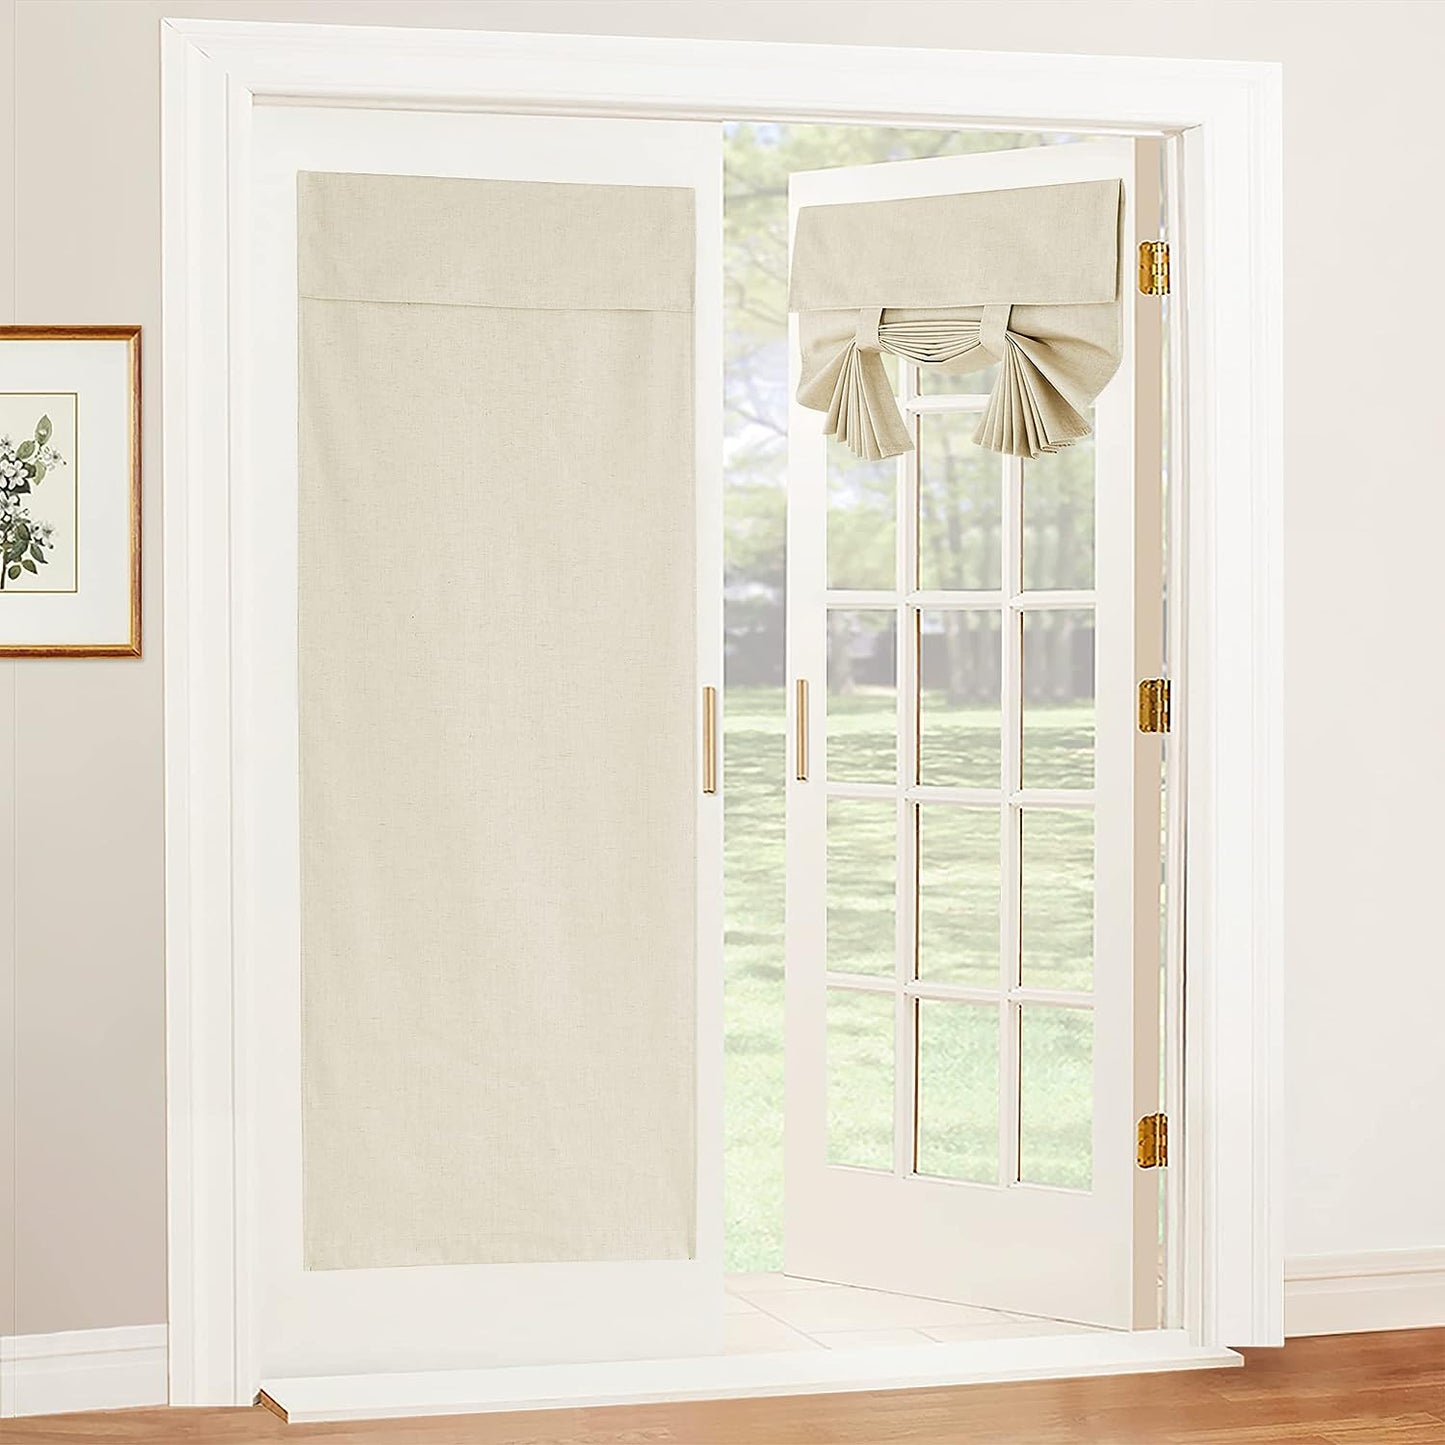 RYB HOME Blackout French Door Curtains, Room Darkening Shades Small Door Window Curtains and Drapes Thermal Insulated Tricia Door Blinds for Patio Door Doorway, W26 X L40 Inch, 1 Panel, Gray  RYB HOME Beige 26" X 69" 